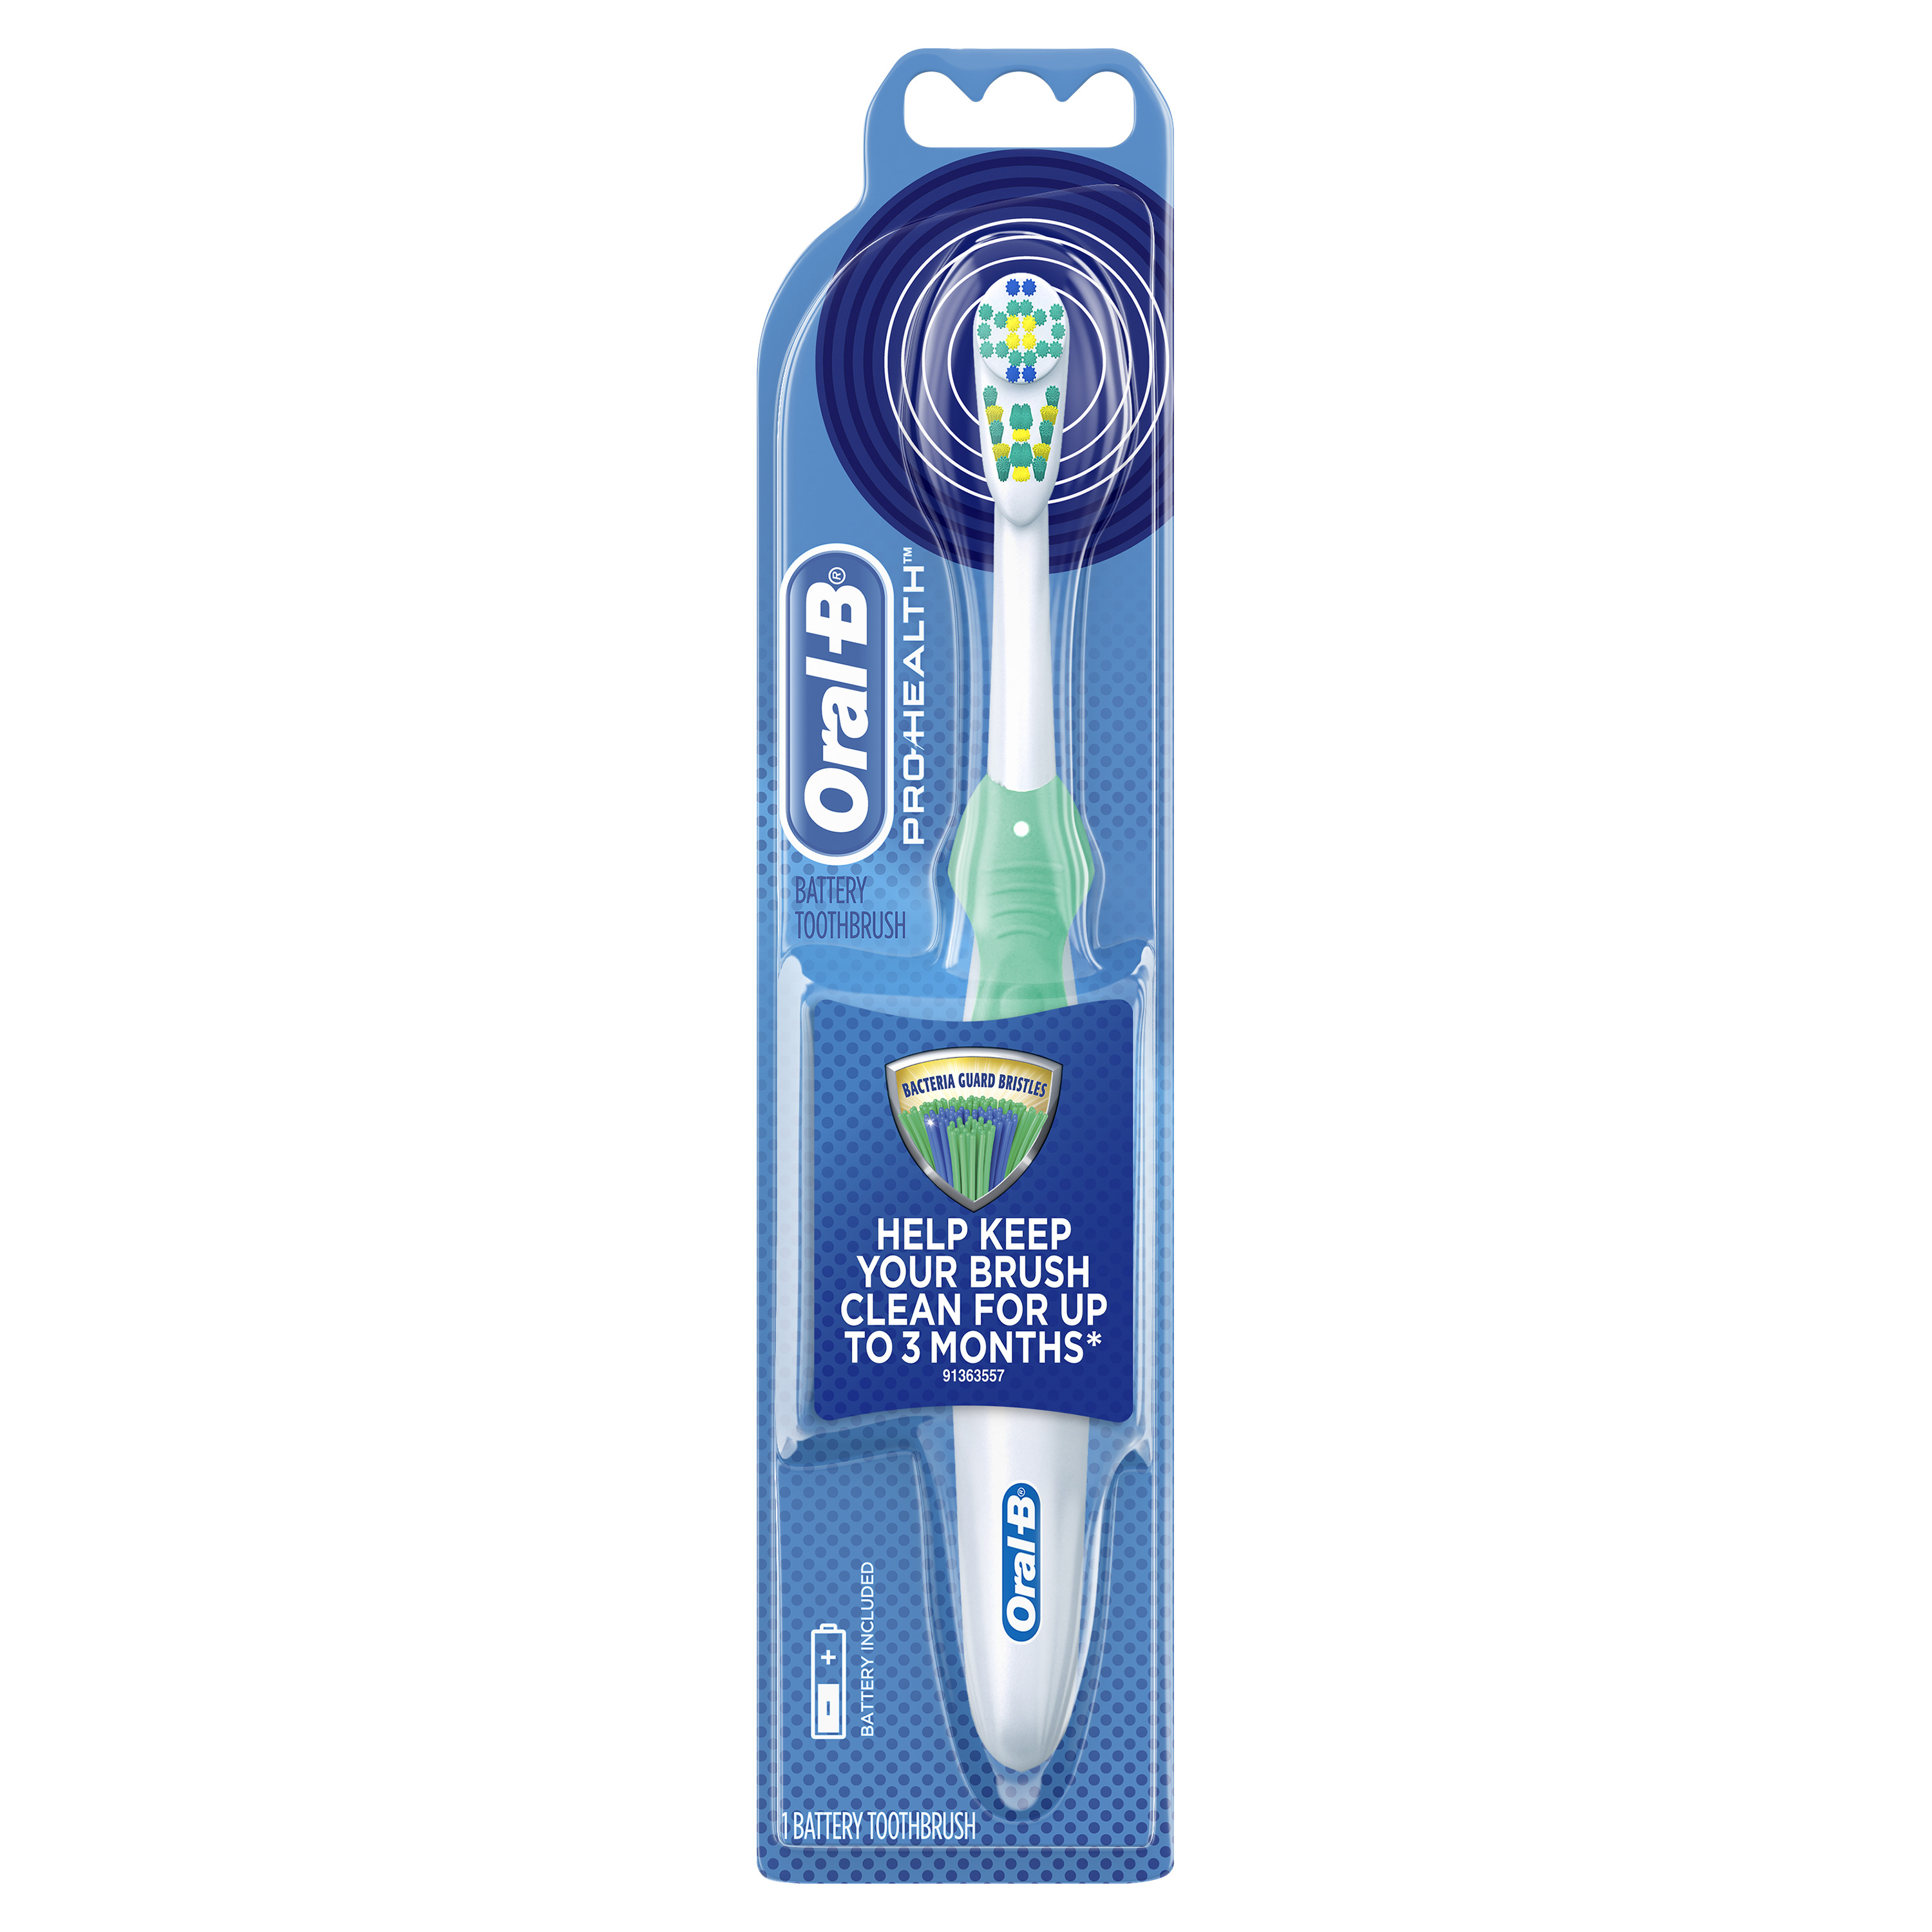 Oral-B Pro-Health Battery Power Toothbrush 1 Count, Colors May Vary - image 1 of 8